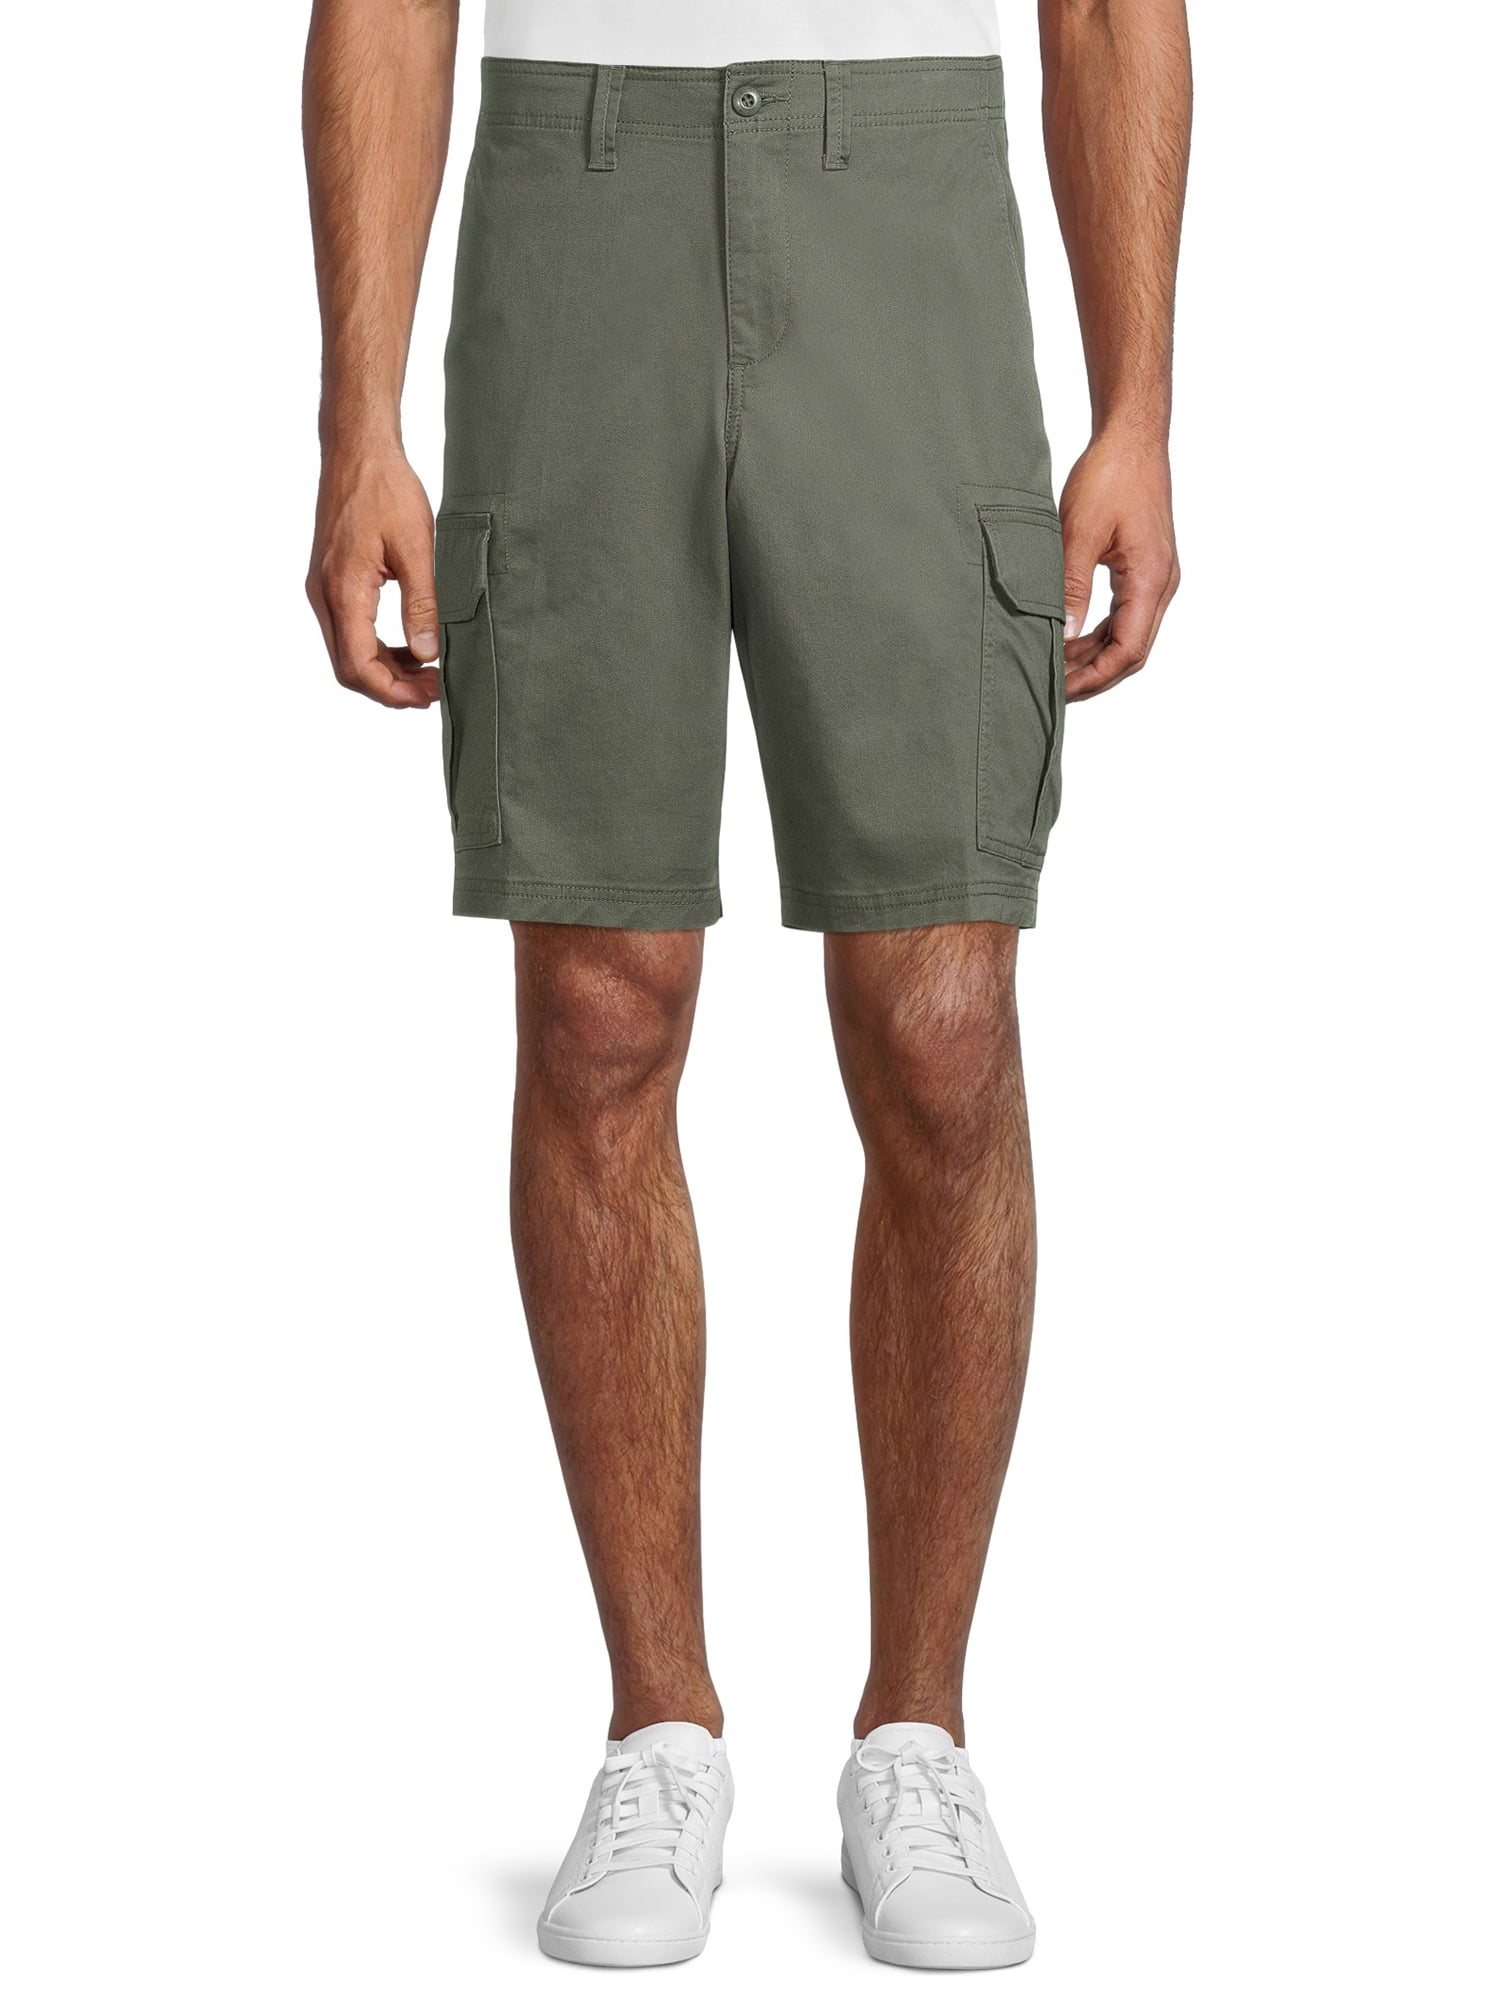 GEORGE Relaxed Fit Mid Rise Cotton Spandex Cargo Short (Men's), 1 Count ...